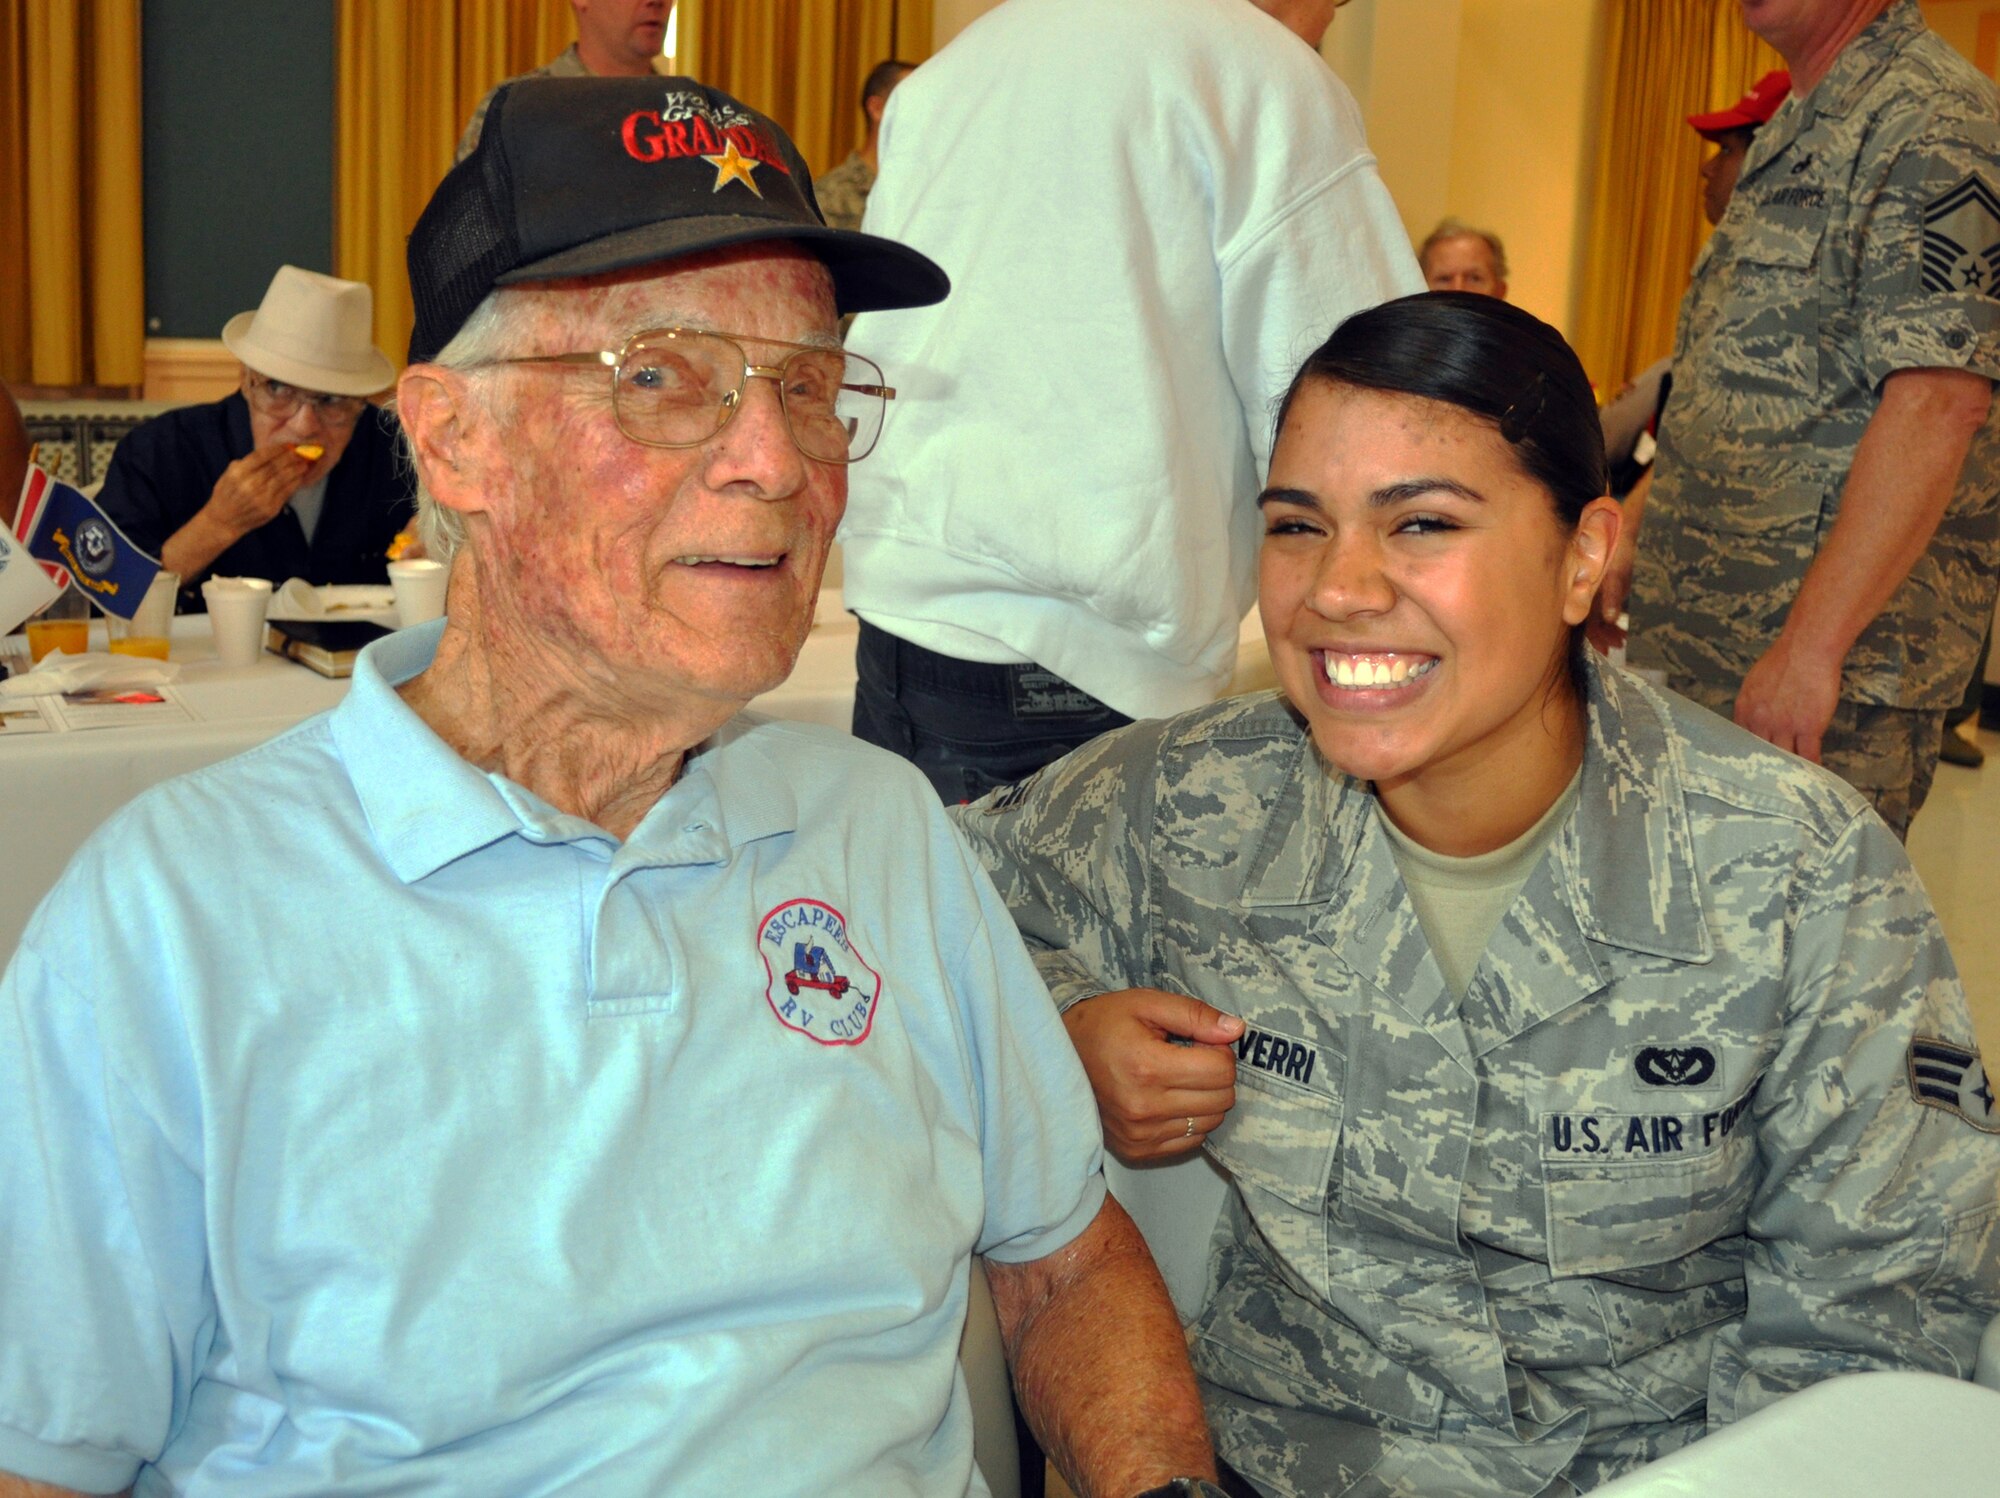 TRAVIS AIR FORCE BASE, Calif. -- Reservist Senior Amn Vanessa Echeverri, 349th Civil Engineer Squadron operations, shares her beautiful smile with a veteran at the California Veterans Home,Yountville.  The 10th anniversary of "Operation Gratitude" was a day of caring and sharing for the 349th Air Mobility Wing Airmen. At the largest veterans home in the state of California, the Travis Airmen threw a champagne brunch for the veterans who paved the way for those of us who still serve. The morning festivities included the Airmen preparing and serving the brunch, and visiting with the veterans in the hospital complex. The festivities included ceremony, music and more. For the complete story, see the August issue of The Contact magazine. (U.S. Air Force photo/Senior Master Sgt. Ellen L. Hatfield)